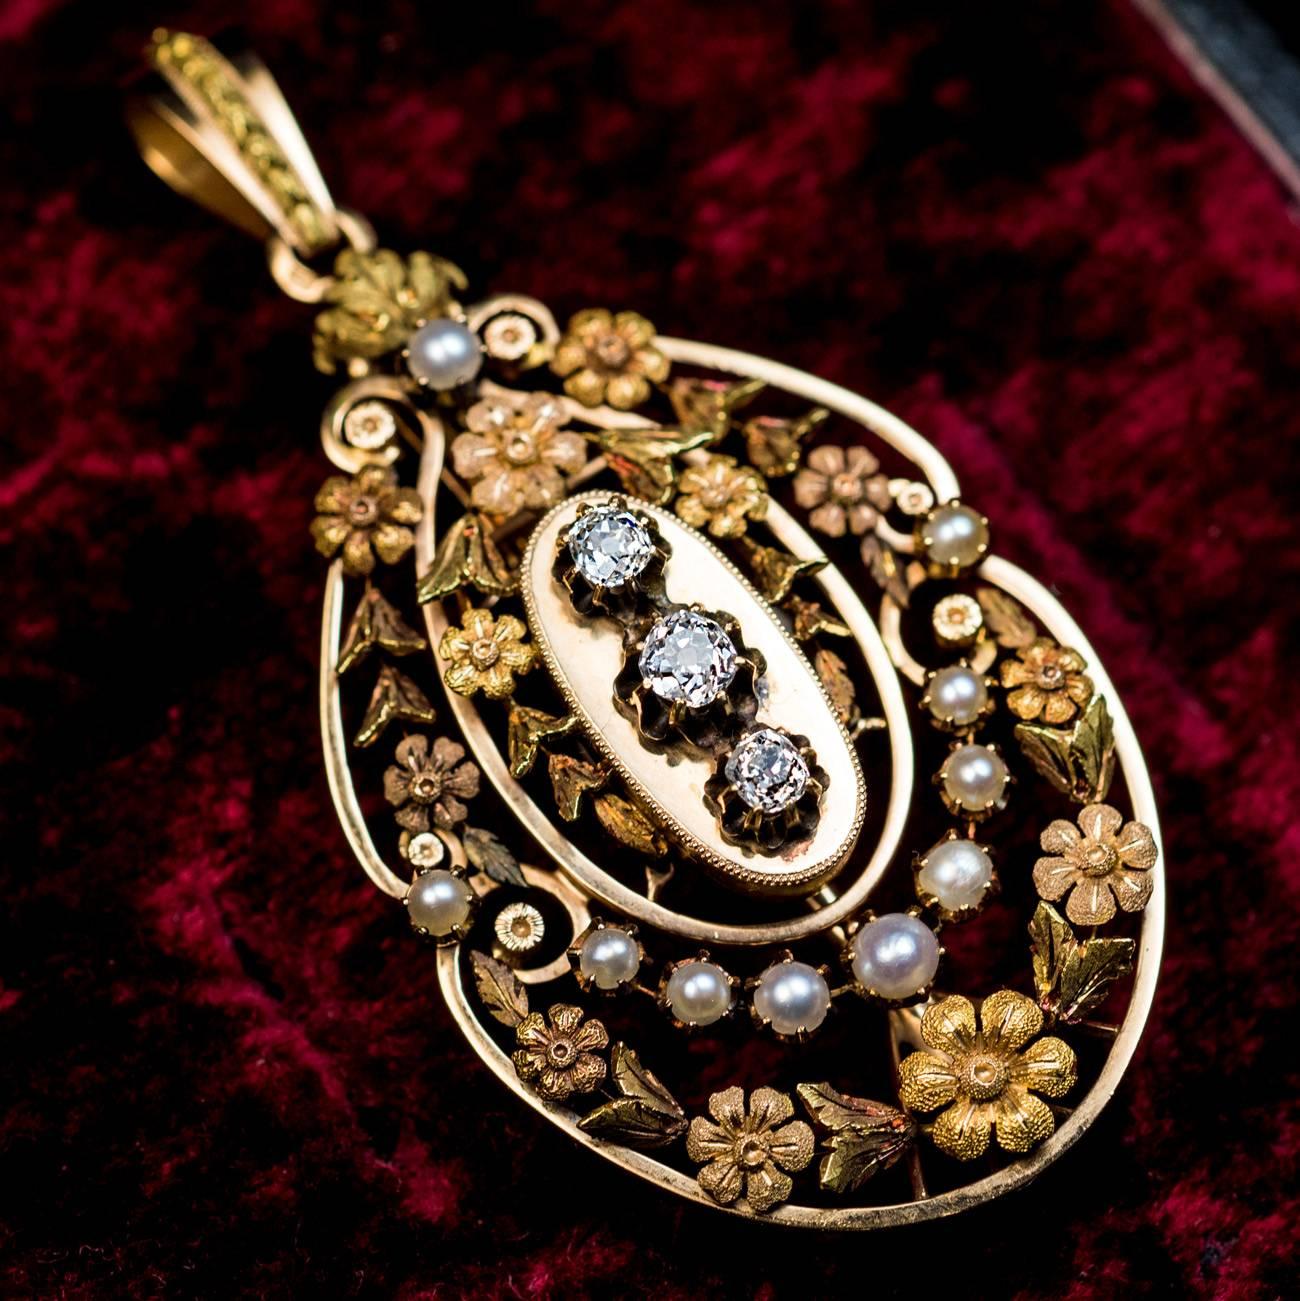 1880s -1890s
An antique 18K gold pendant with finely chased and engraved multi-tone gold flower garlands, is embellished with half pearls and three old mine cut diamonds.
Estimated total diamond weight is 0.82 ct.
The pendant is marked with three